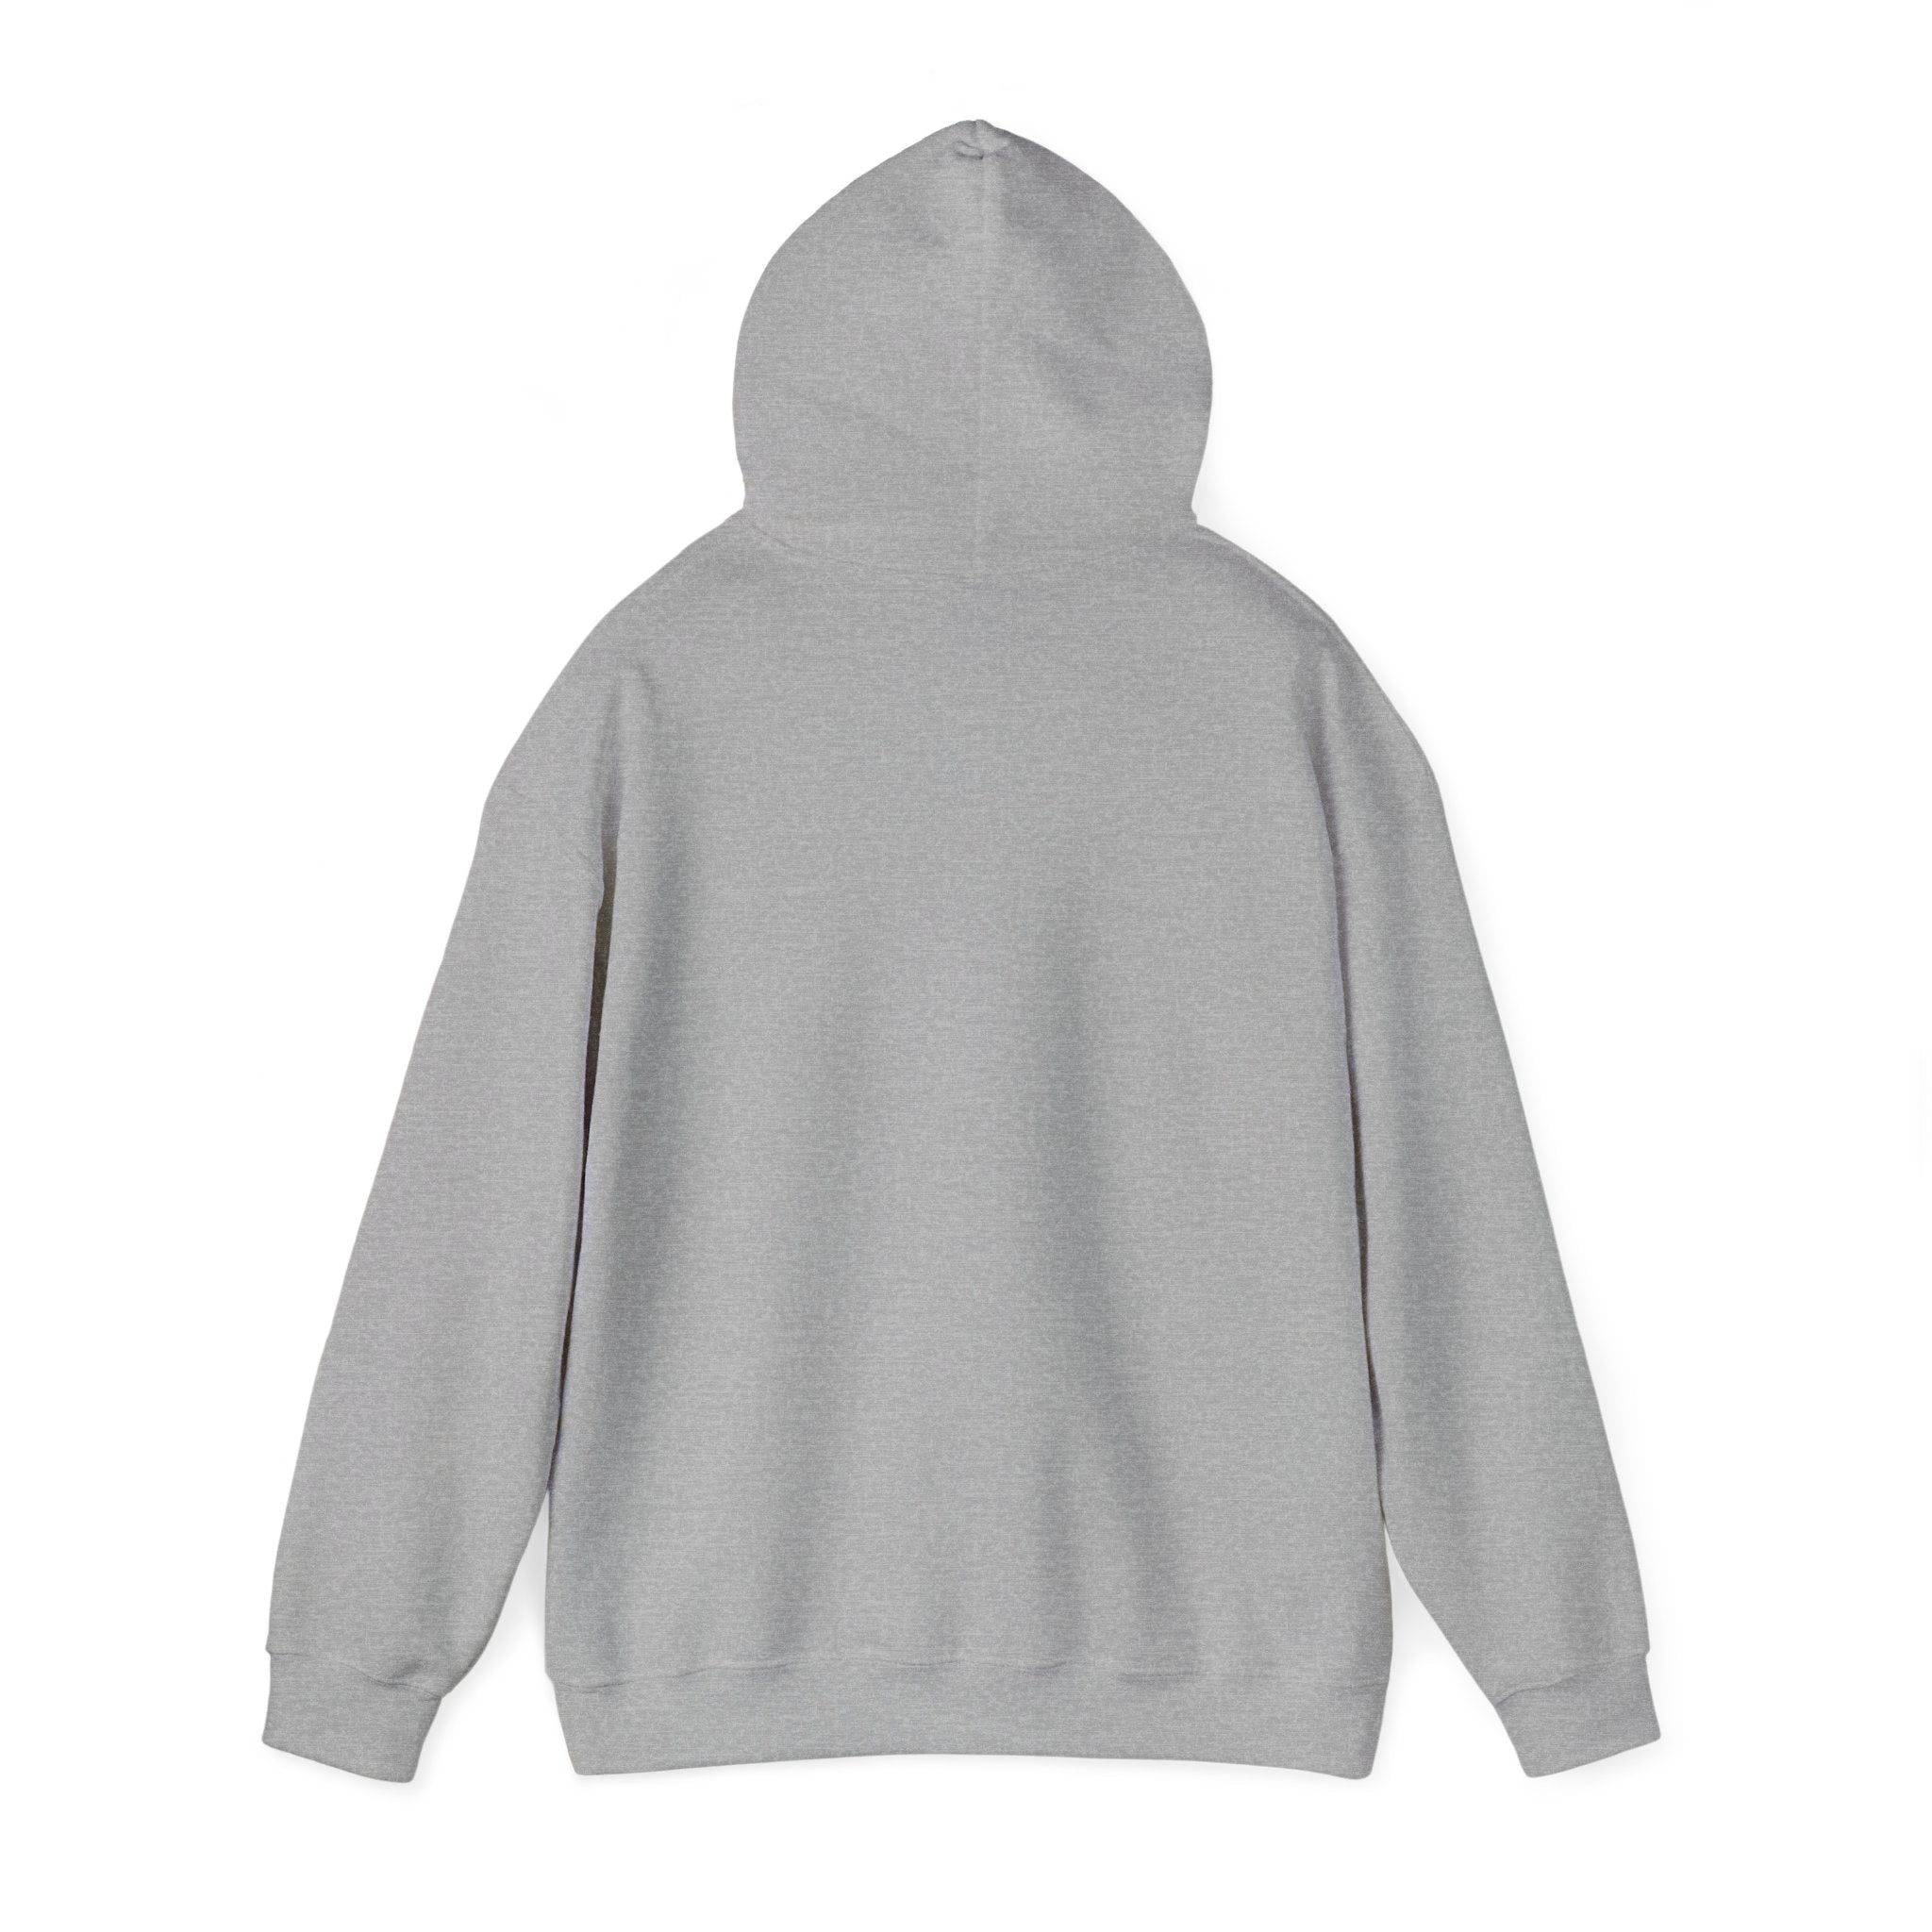 Back view of a gray I am Older Than the Internet - Hooded Sweatshirt with a hood and long sleeves, displayed against a white background. This classic piece offers timeless style and comfort.